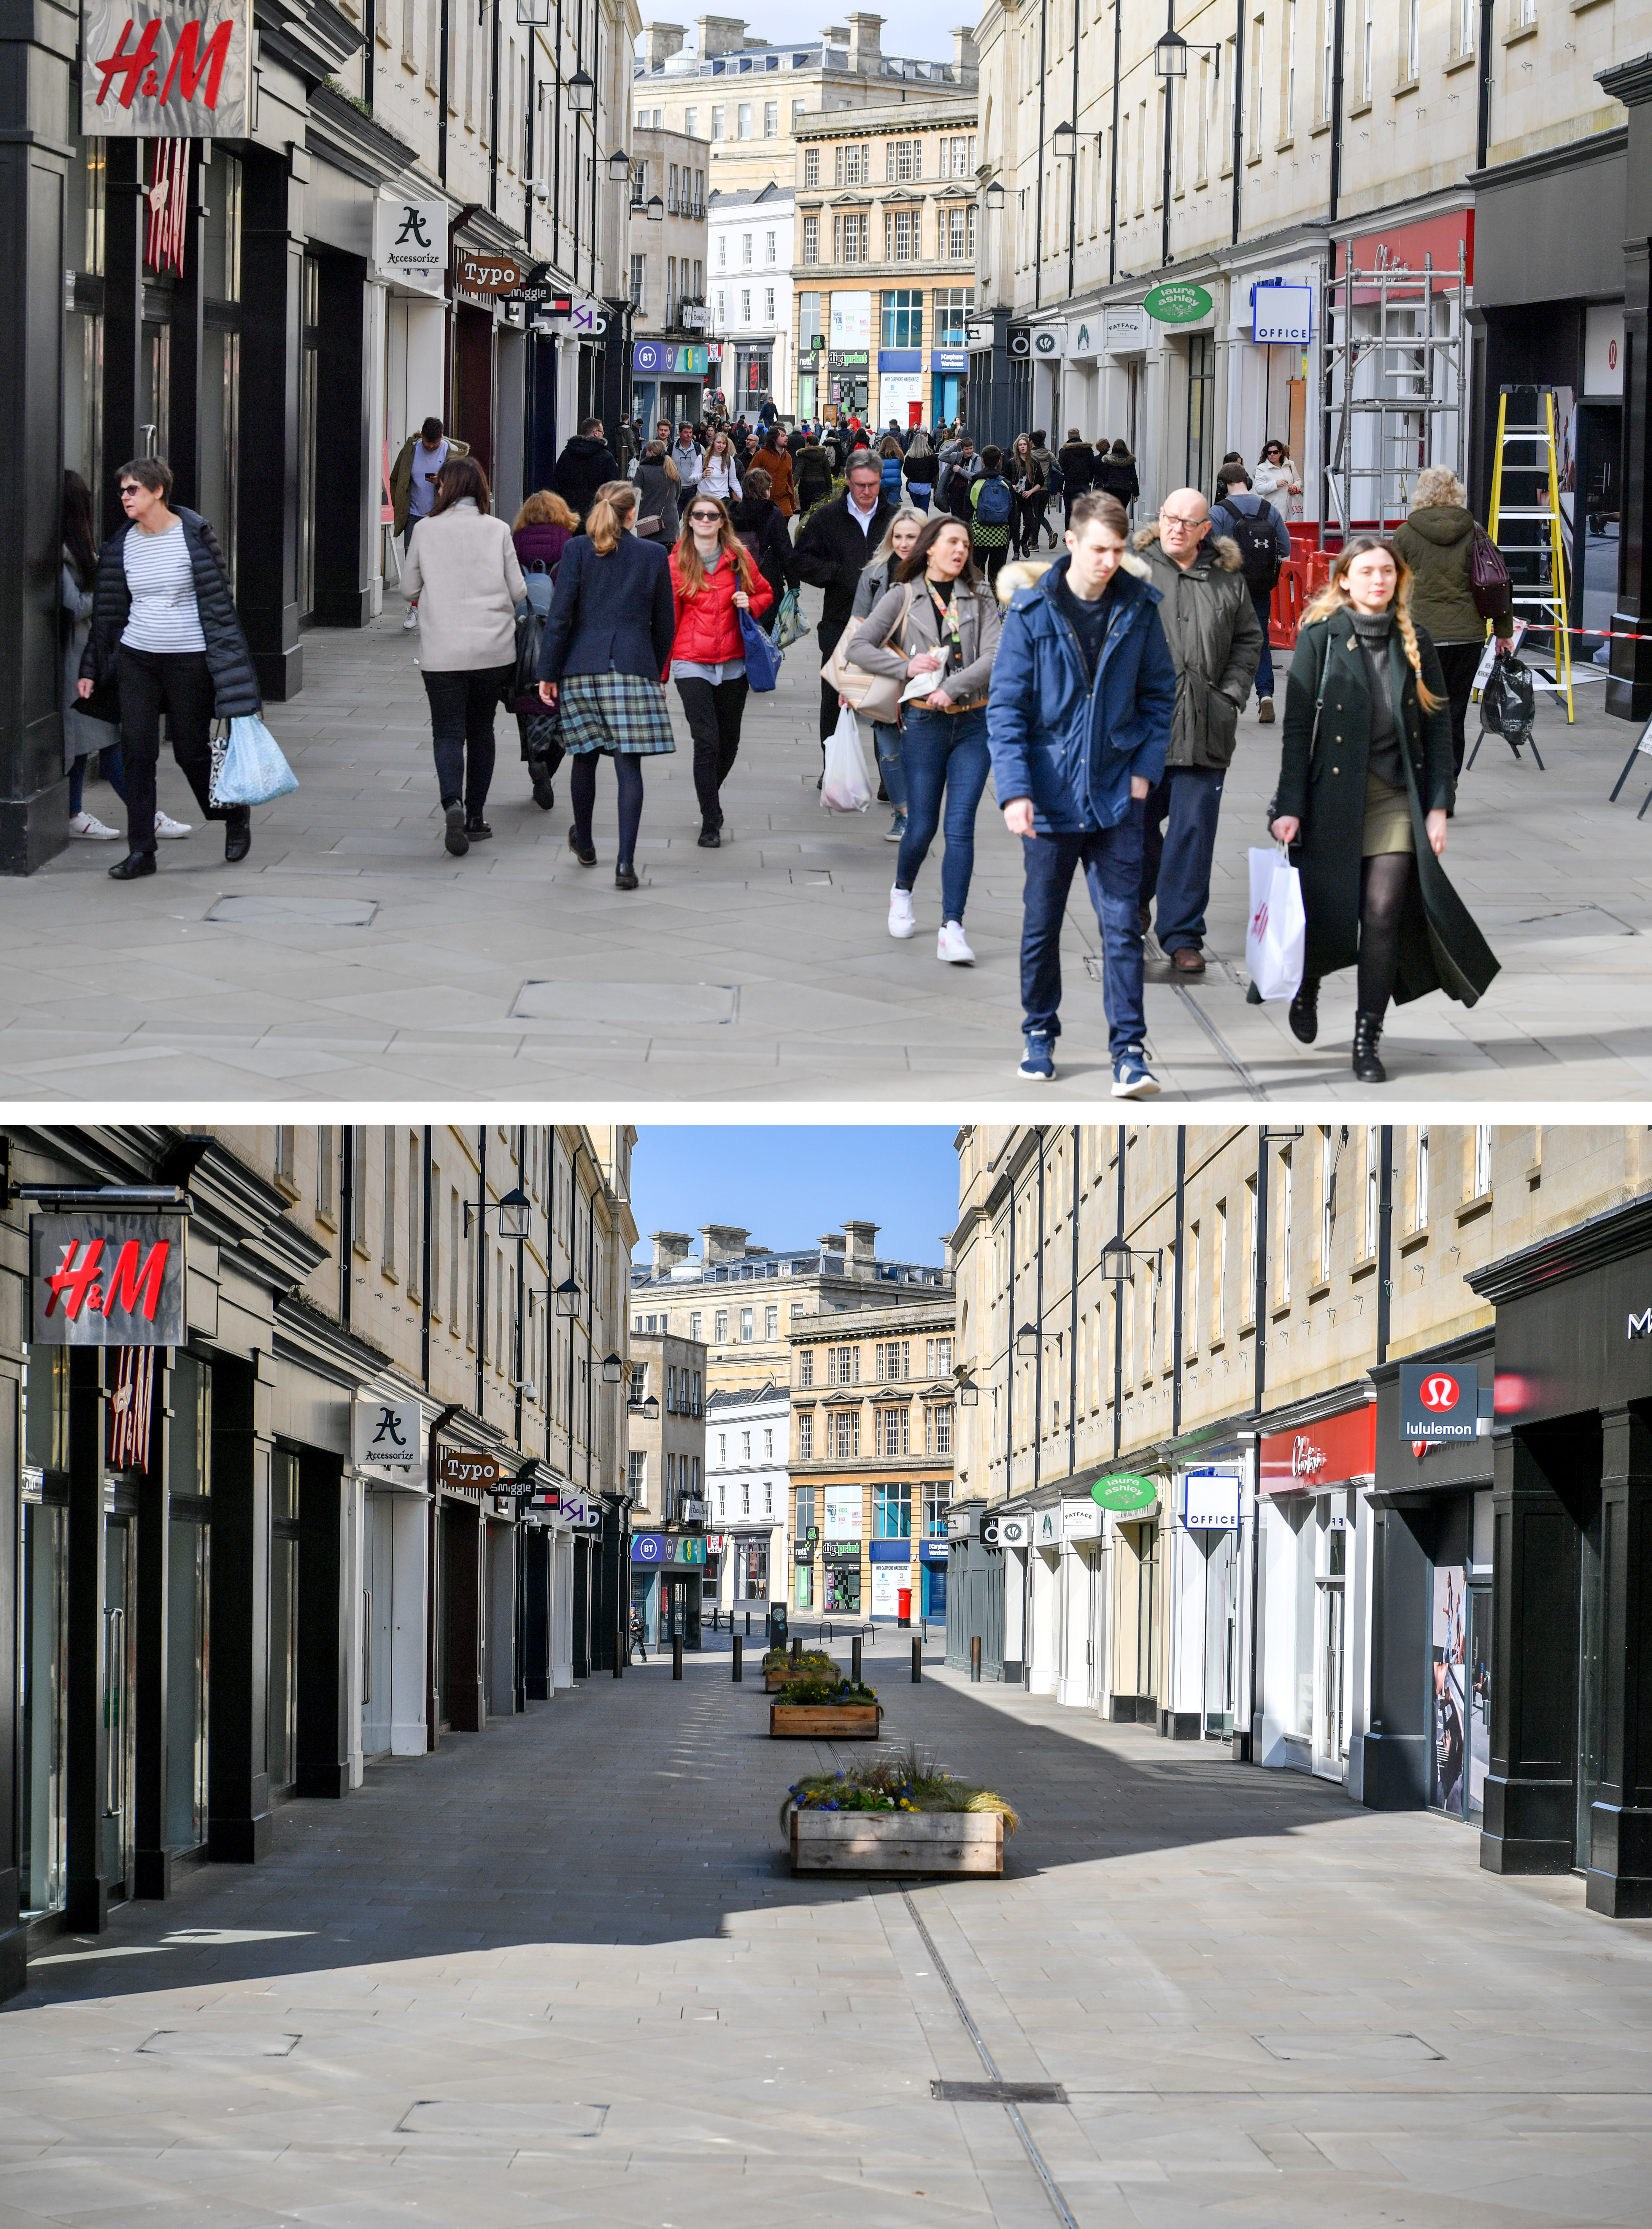 A composite image of the streets in the centre of Bath busy with visitors and shoppers on 11/03/20 (top) and the empty streets on Tuesday 24/03/20 the day after Prime Minister Boris Johnson put the UK in lockdown to help curb the spread of the coronavirus.